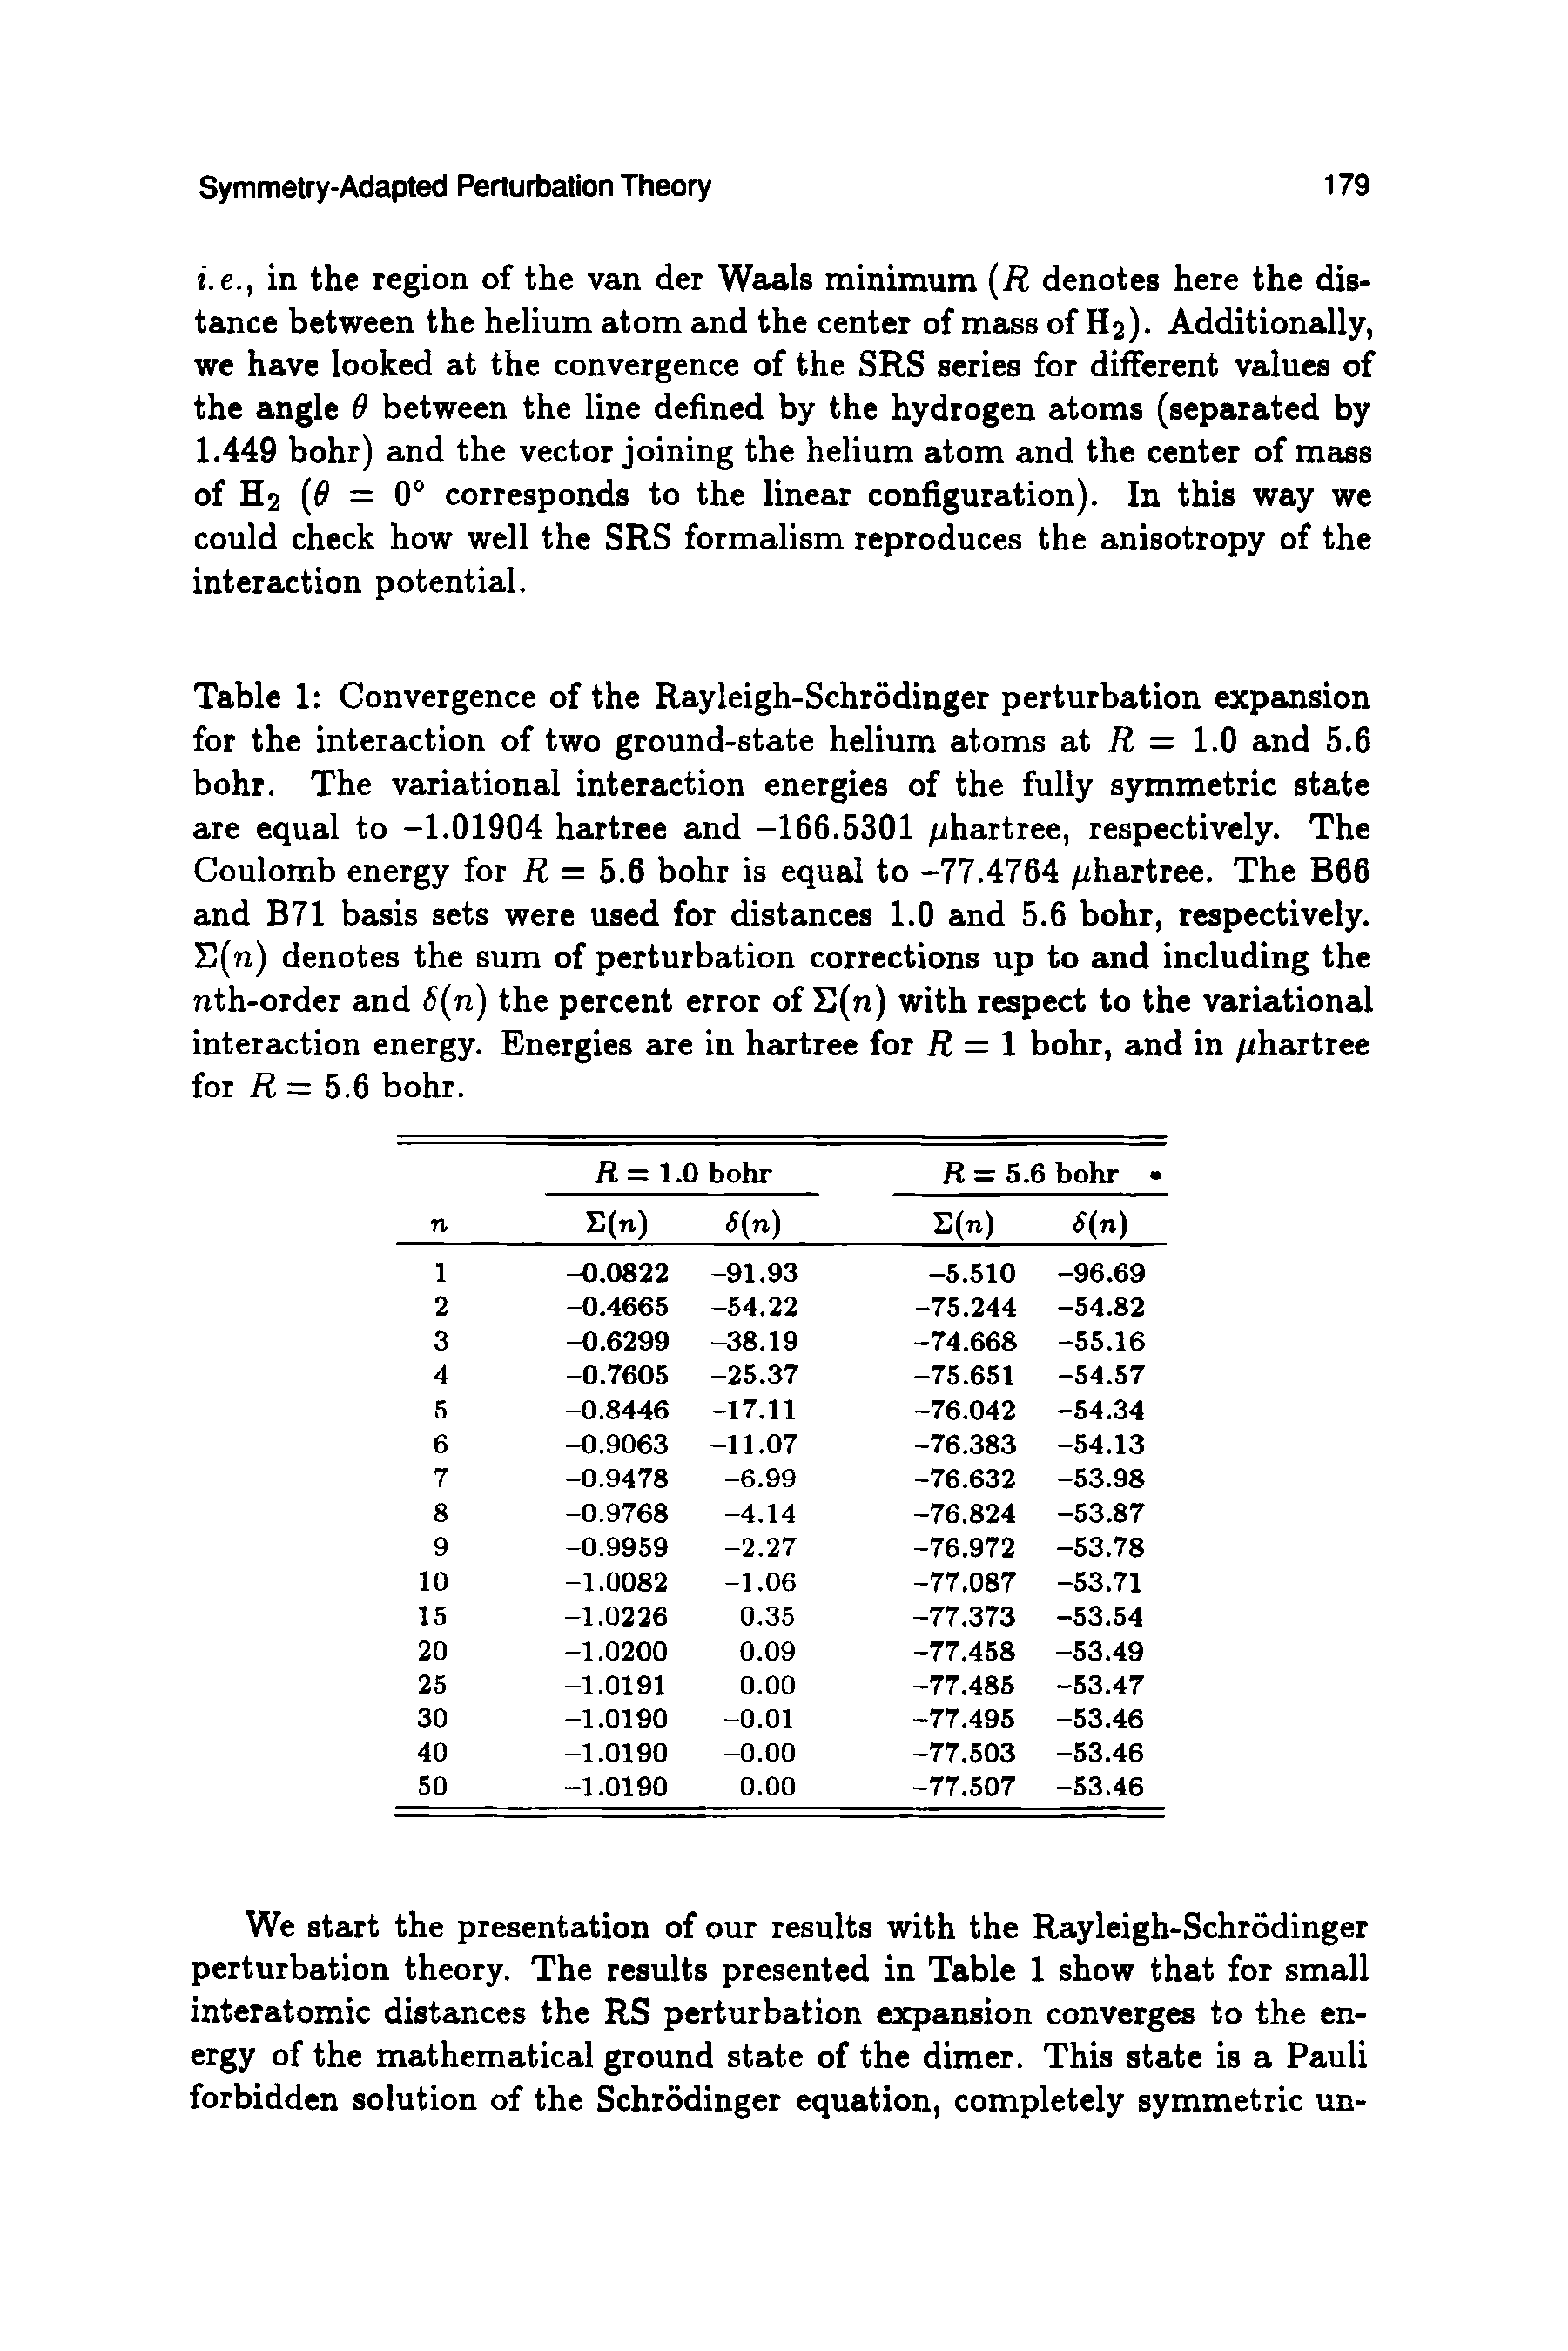 Table 1 Convergence of the Rayleigh-Schrodinger perturbation expansion for the interaction of two ground-state helium atoms at R = 1.0 and 5.6 bohr. The variational interaction energies of the fully symmetric state are equal to -1.01904 hartree and -166.5301 hartree, respectively. The Coulomb energy for R = 5.6 bohr is equal to -77.4764 /ihartree. The B66 and B71 basis sets were used for distances 1.0 and 5.6 bohr, respectively. E(n) denotes the sum of perturbation corrections up to and including the nth-order and S(n) the percent error of E(n) with respect to the variational interaction energy. Energies are in hartree for R = 1 bohr, and in /ihartree for R = 5.6 bohr.